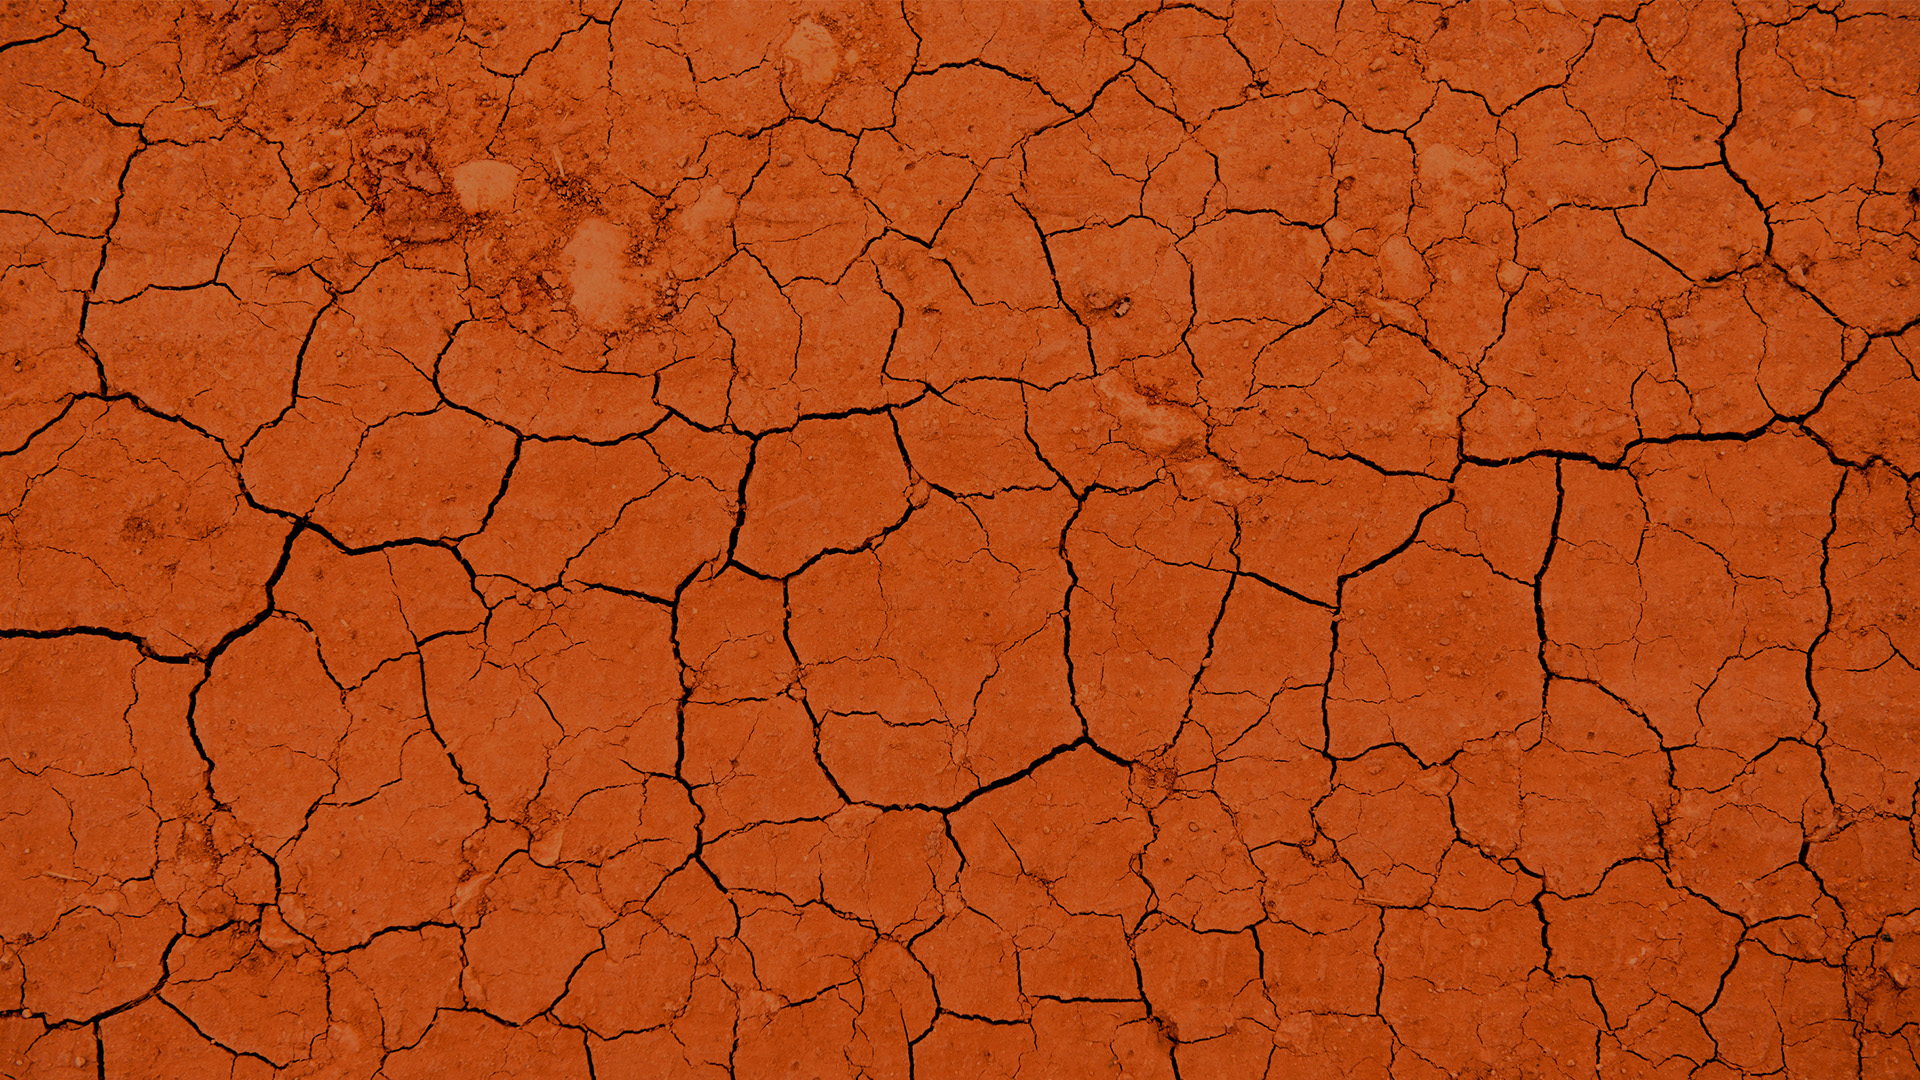 image of red scorched earth